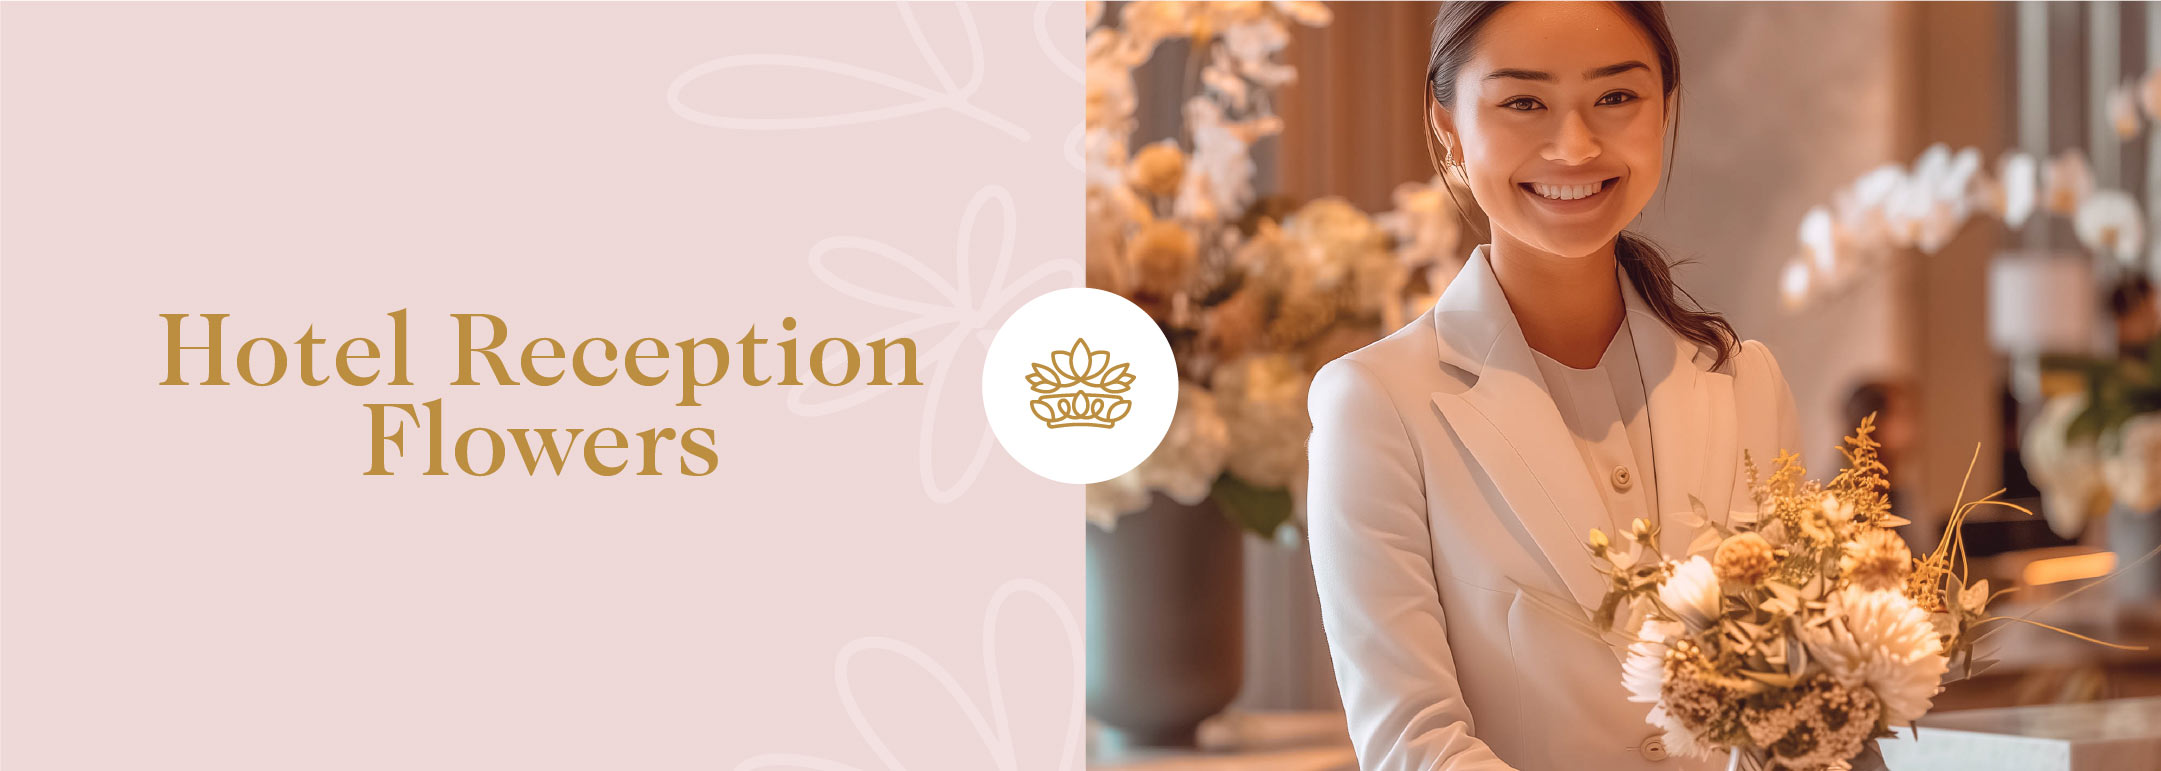 Welcoming hotel receptionist with a radiant smile, holding a bouquet of elegant flowers from the Hotel Reception Flowers Collection, enhancing the warm and inviting atmosphere of the lobby. Available at Fabulous Flowers and Gifts.